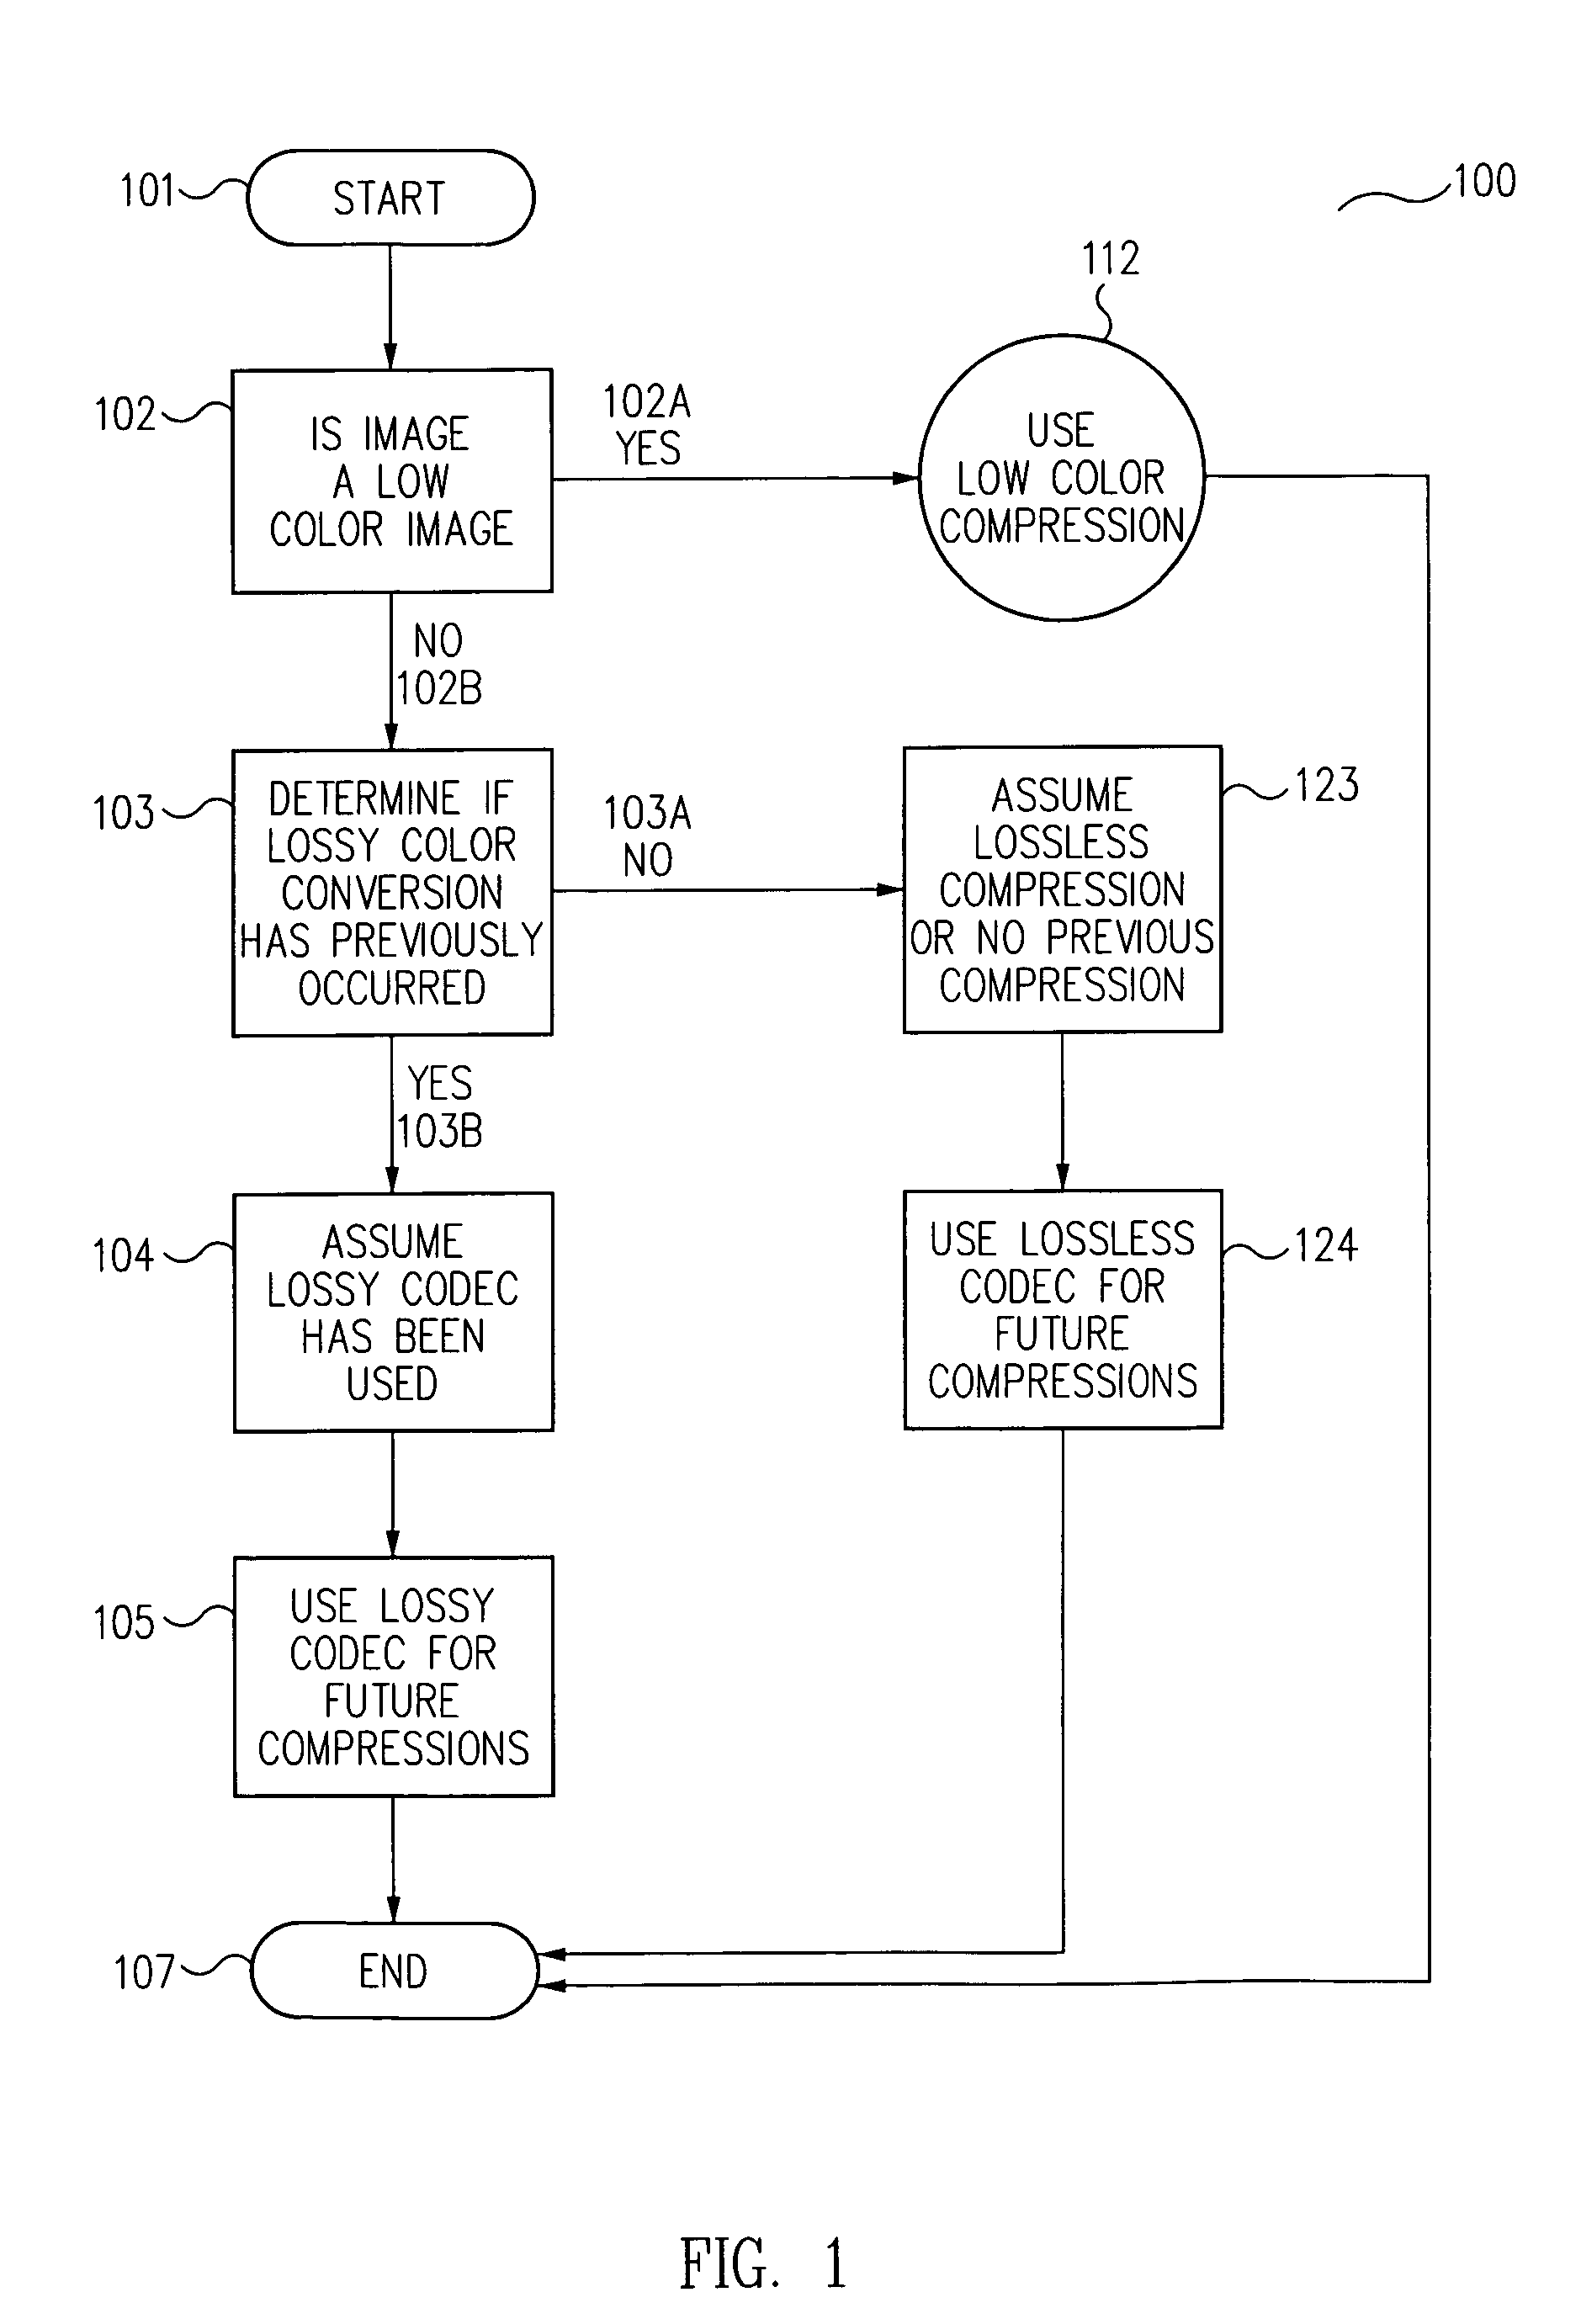 Method for determining whether to use a lossy or lossless codec to compress a digital image using a table of non-allowed pixel values